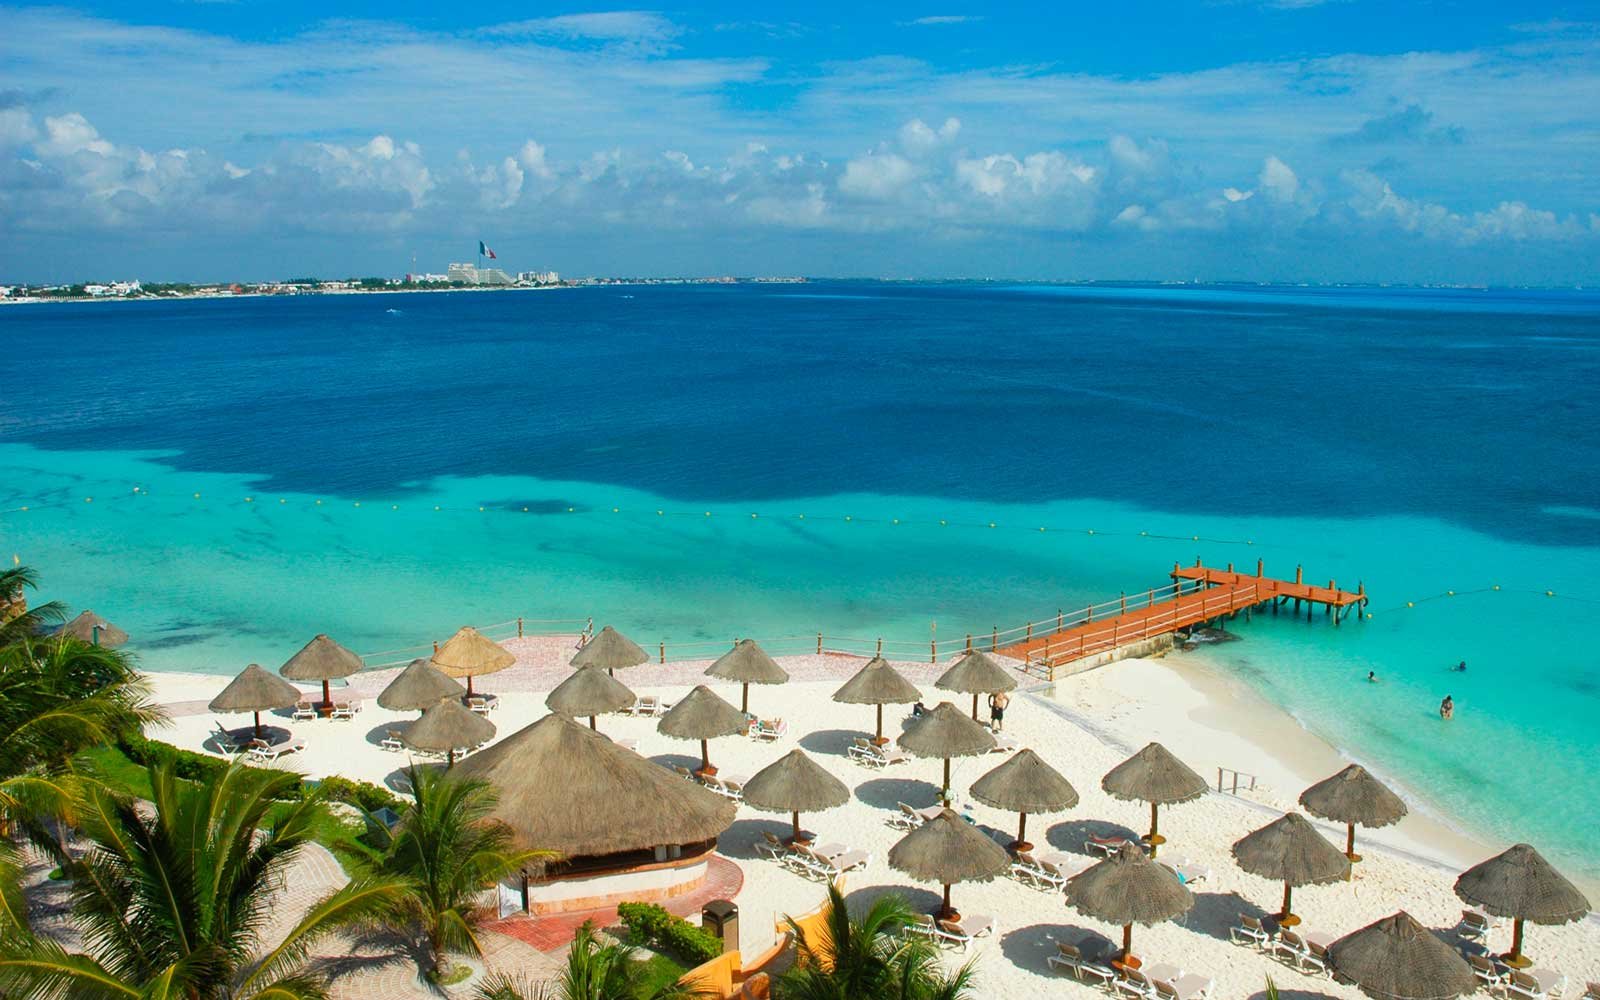 Houston to Cancun Mexico $207 RT Nonstop Airfares on United Airlines BE (SUMMER Travel June - July 2022)